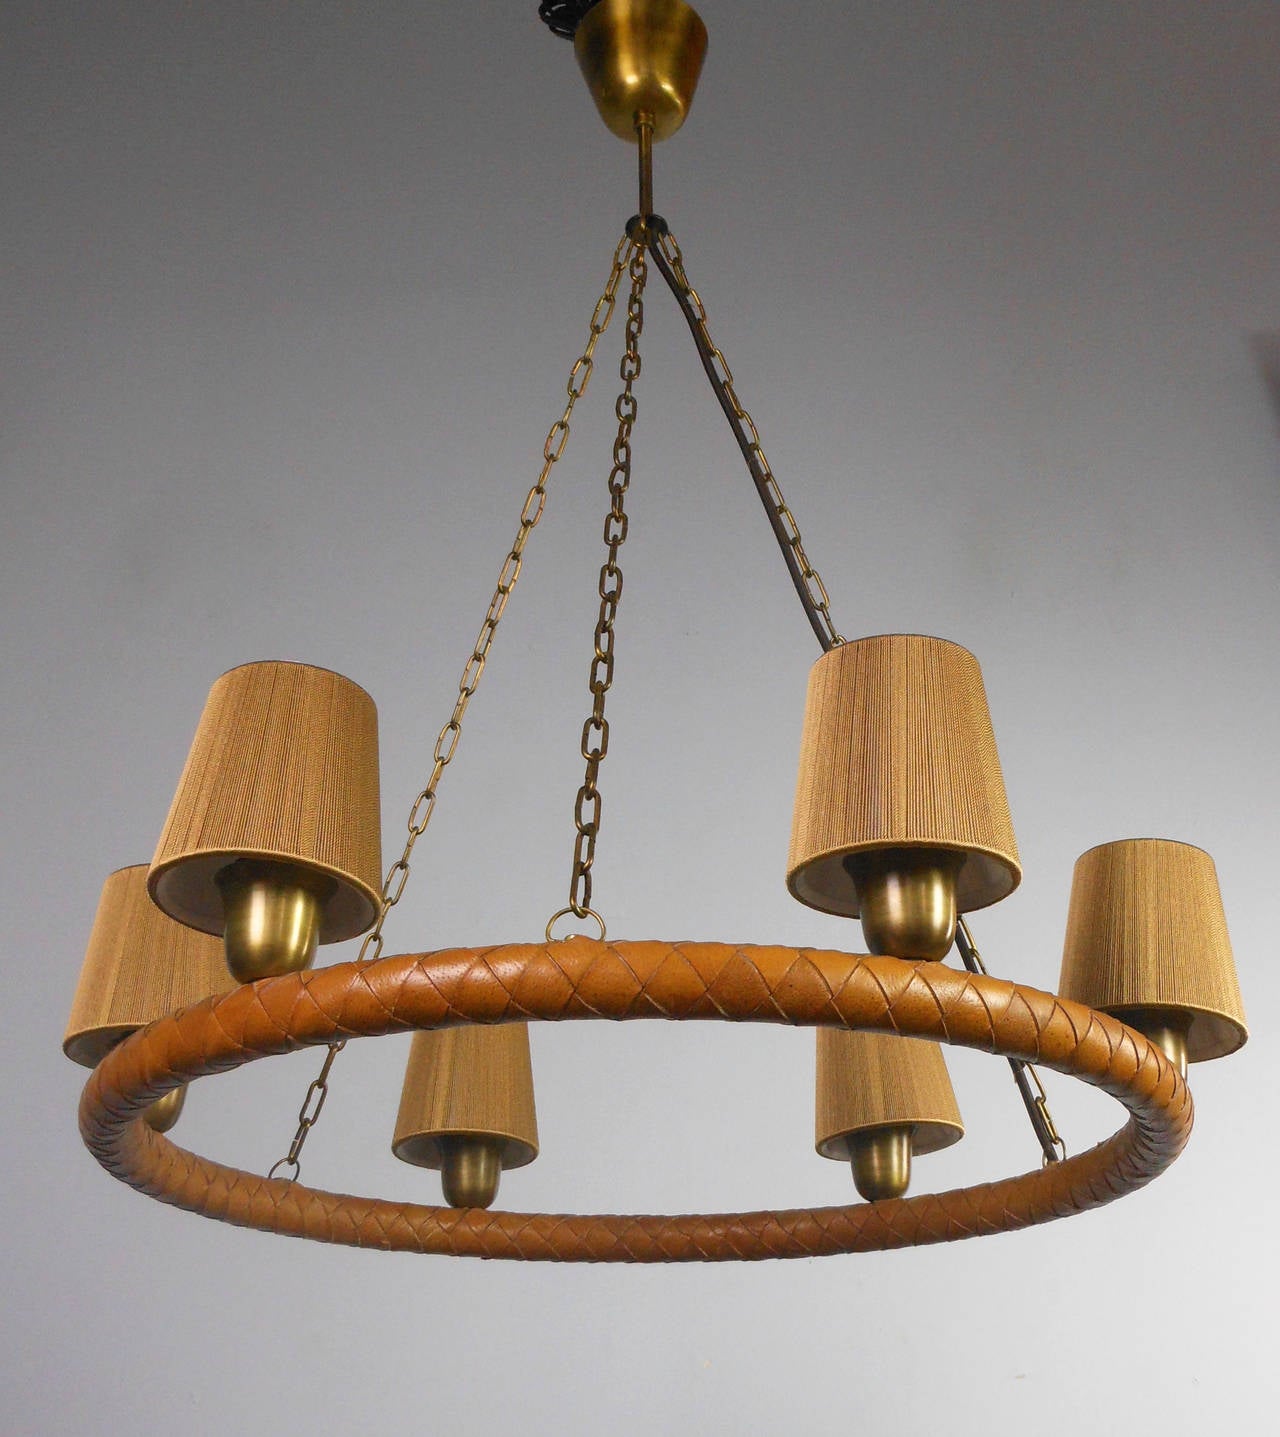 The circular domed canopy issuing three chains, the leather wrapped ring supporting six lights.